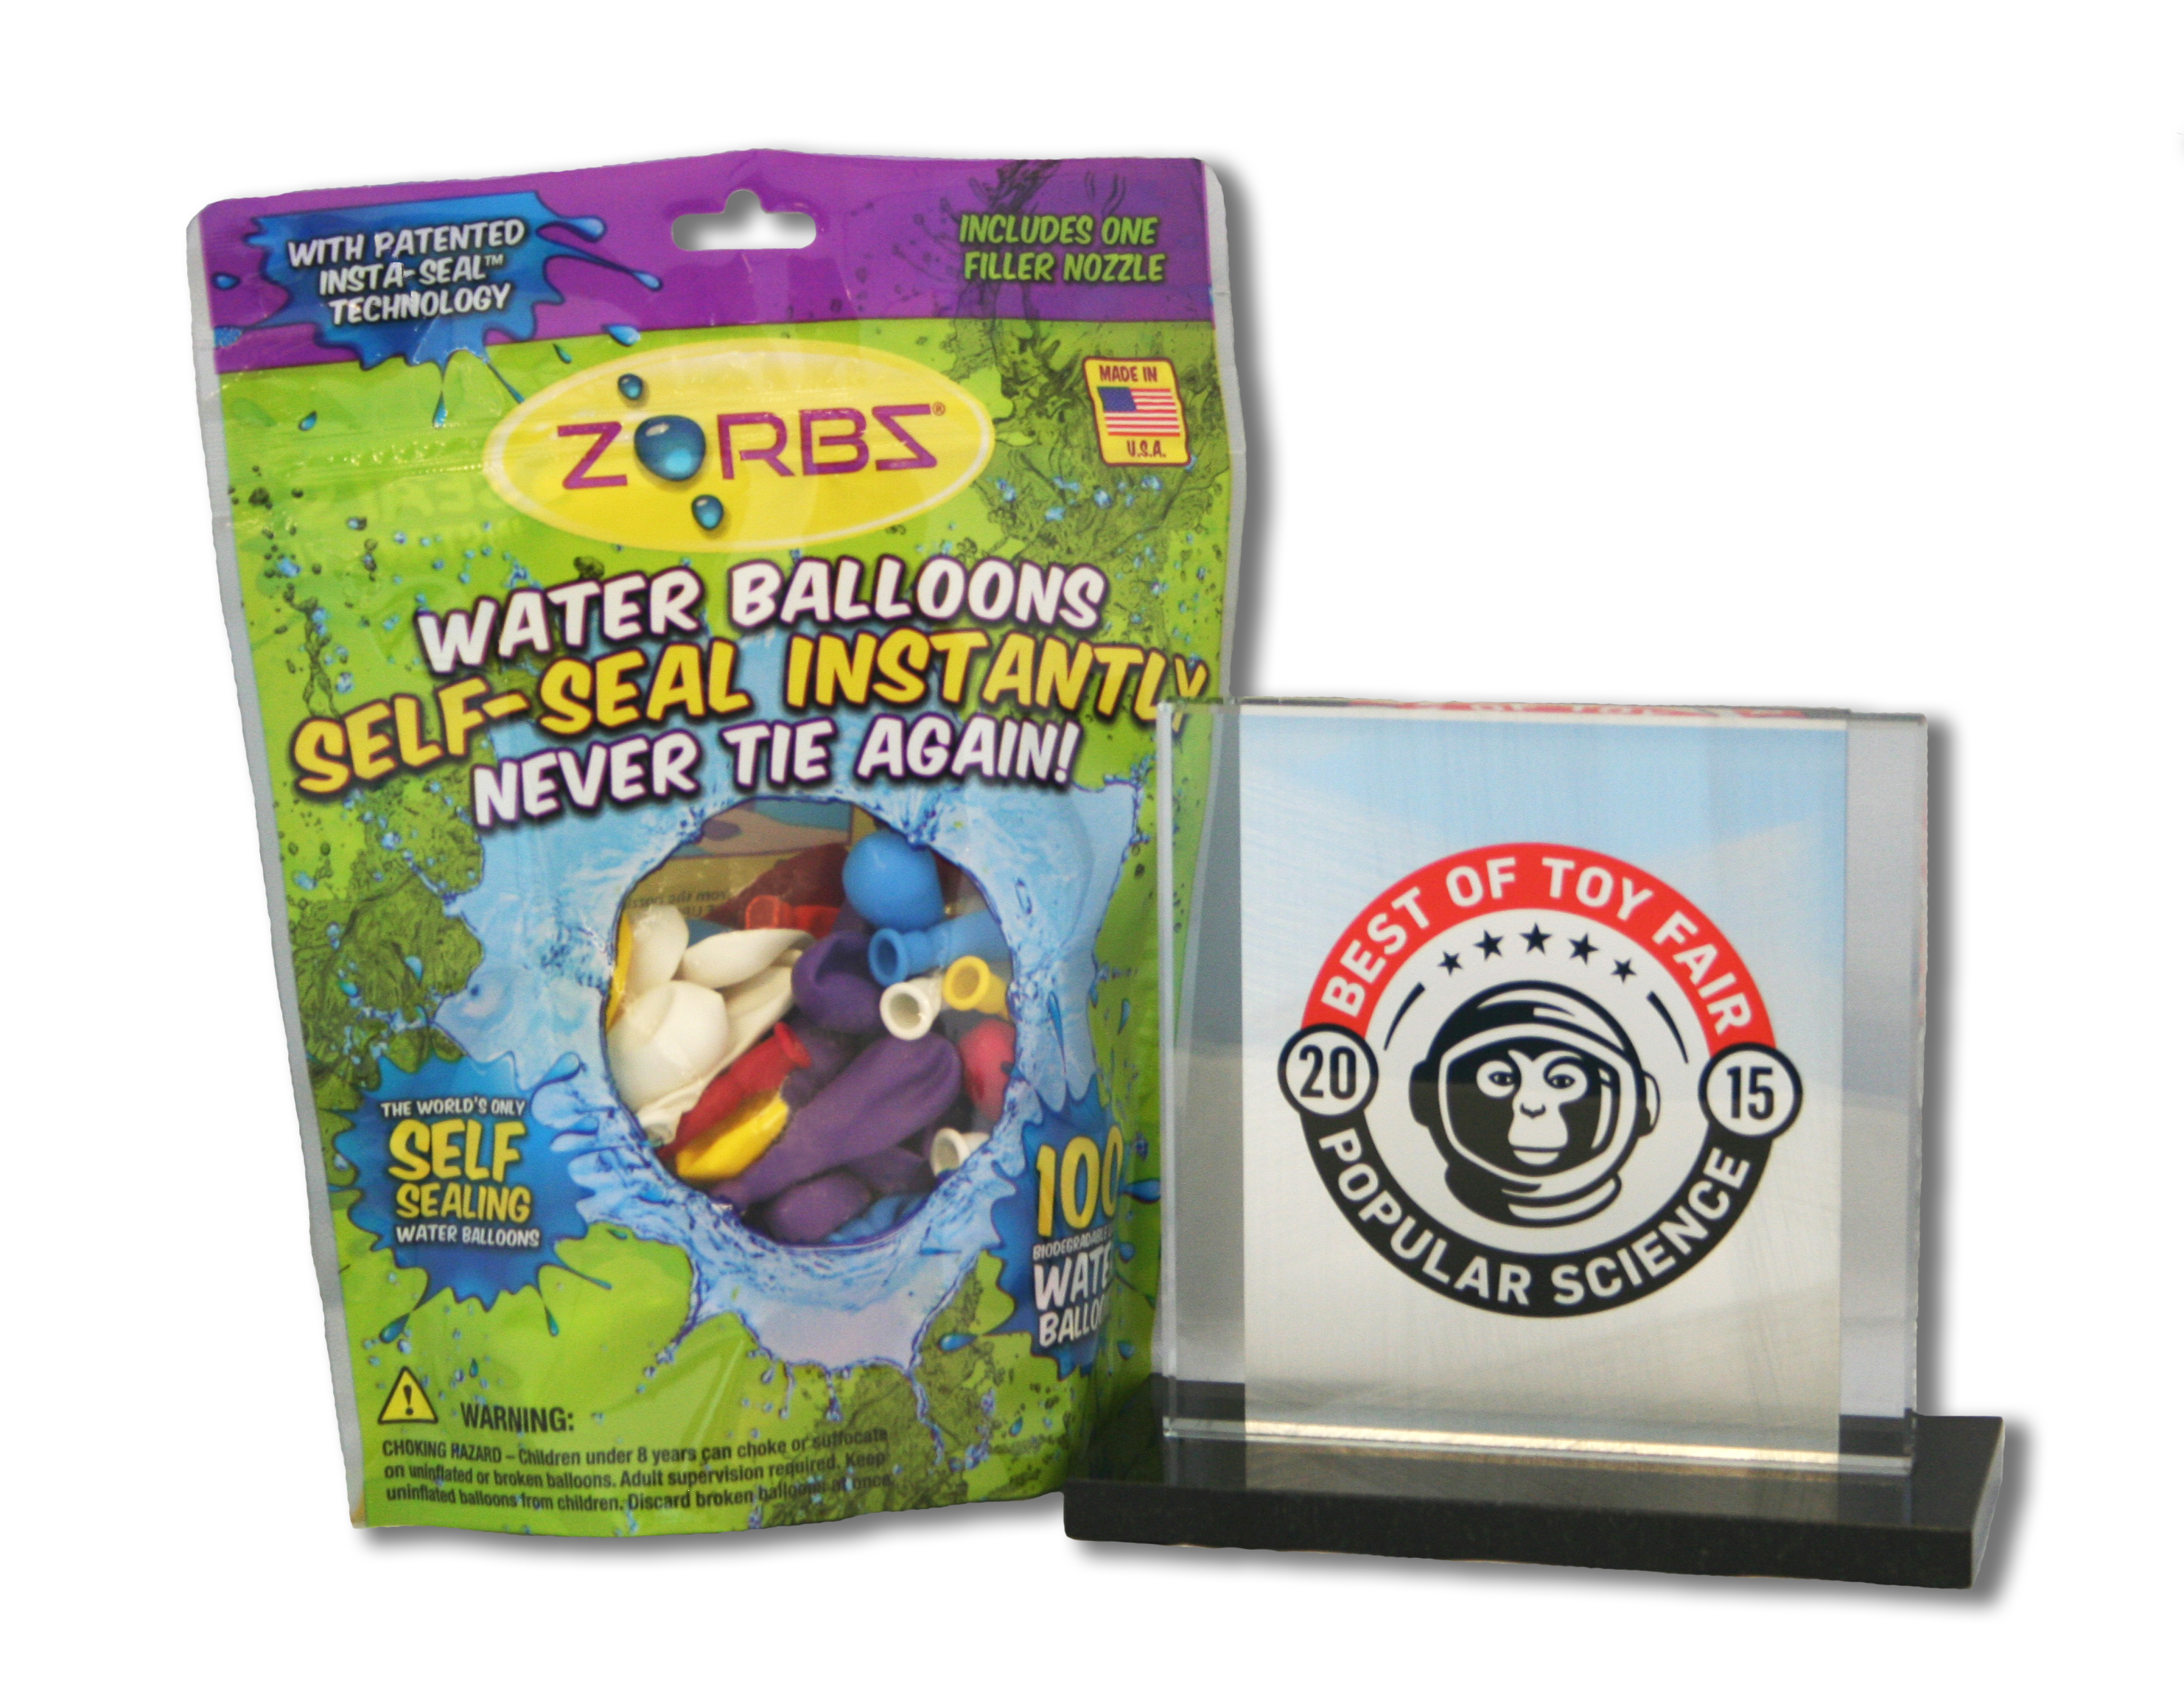 ZORBZ Self-Sealing Water Balloons Awarded 'Best In Show' by Popular Science Magazine